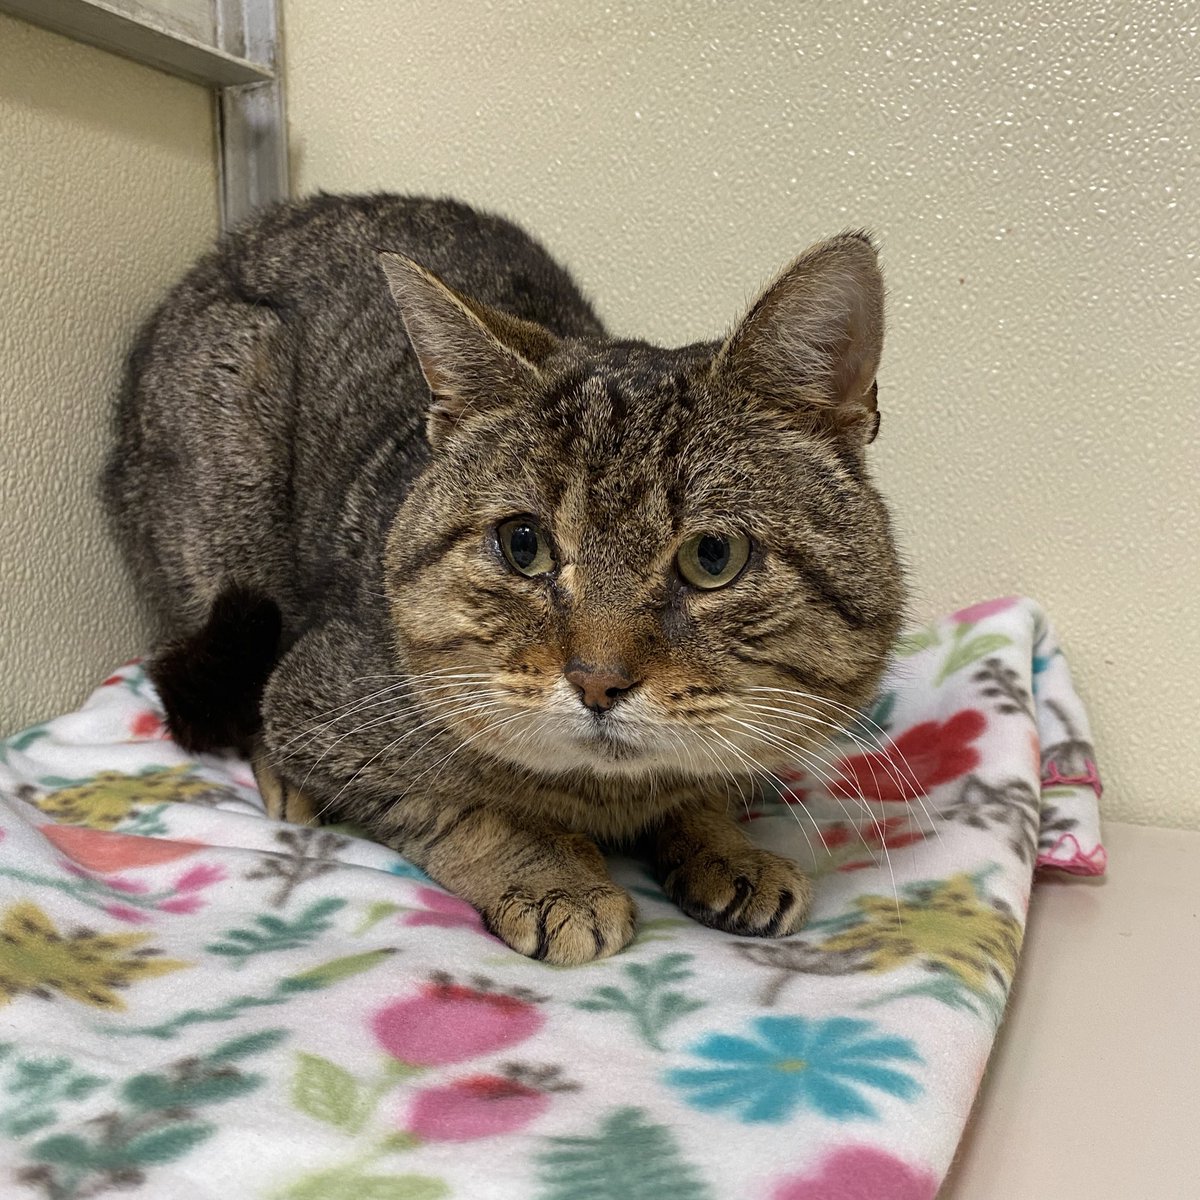 Cantaloupe is new to our adoption floor! He’s a super sweet senior who loves snacks and chin rubs. Please help us find him a home. 

📍 Blackwood, NJ 

#adopt #sheltercats #catlover